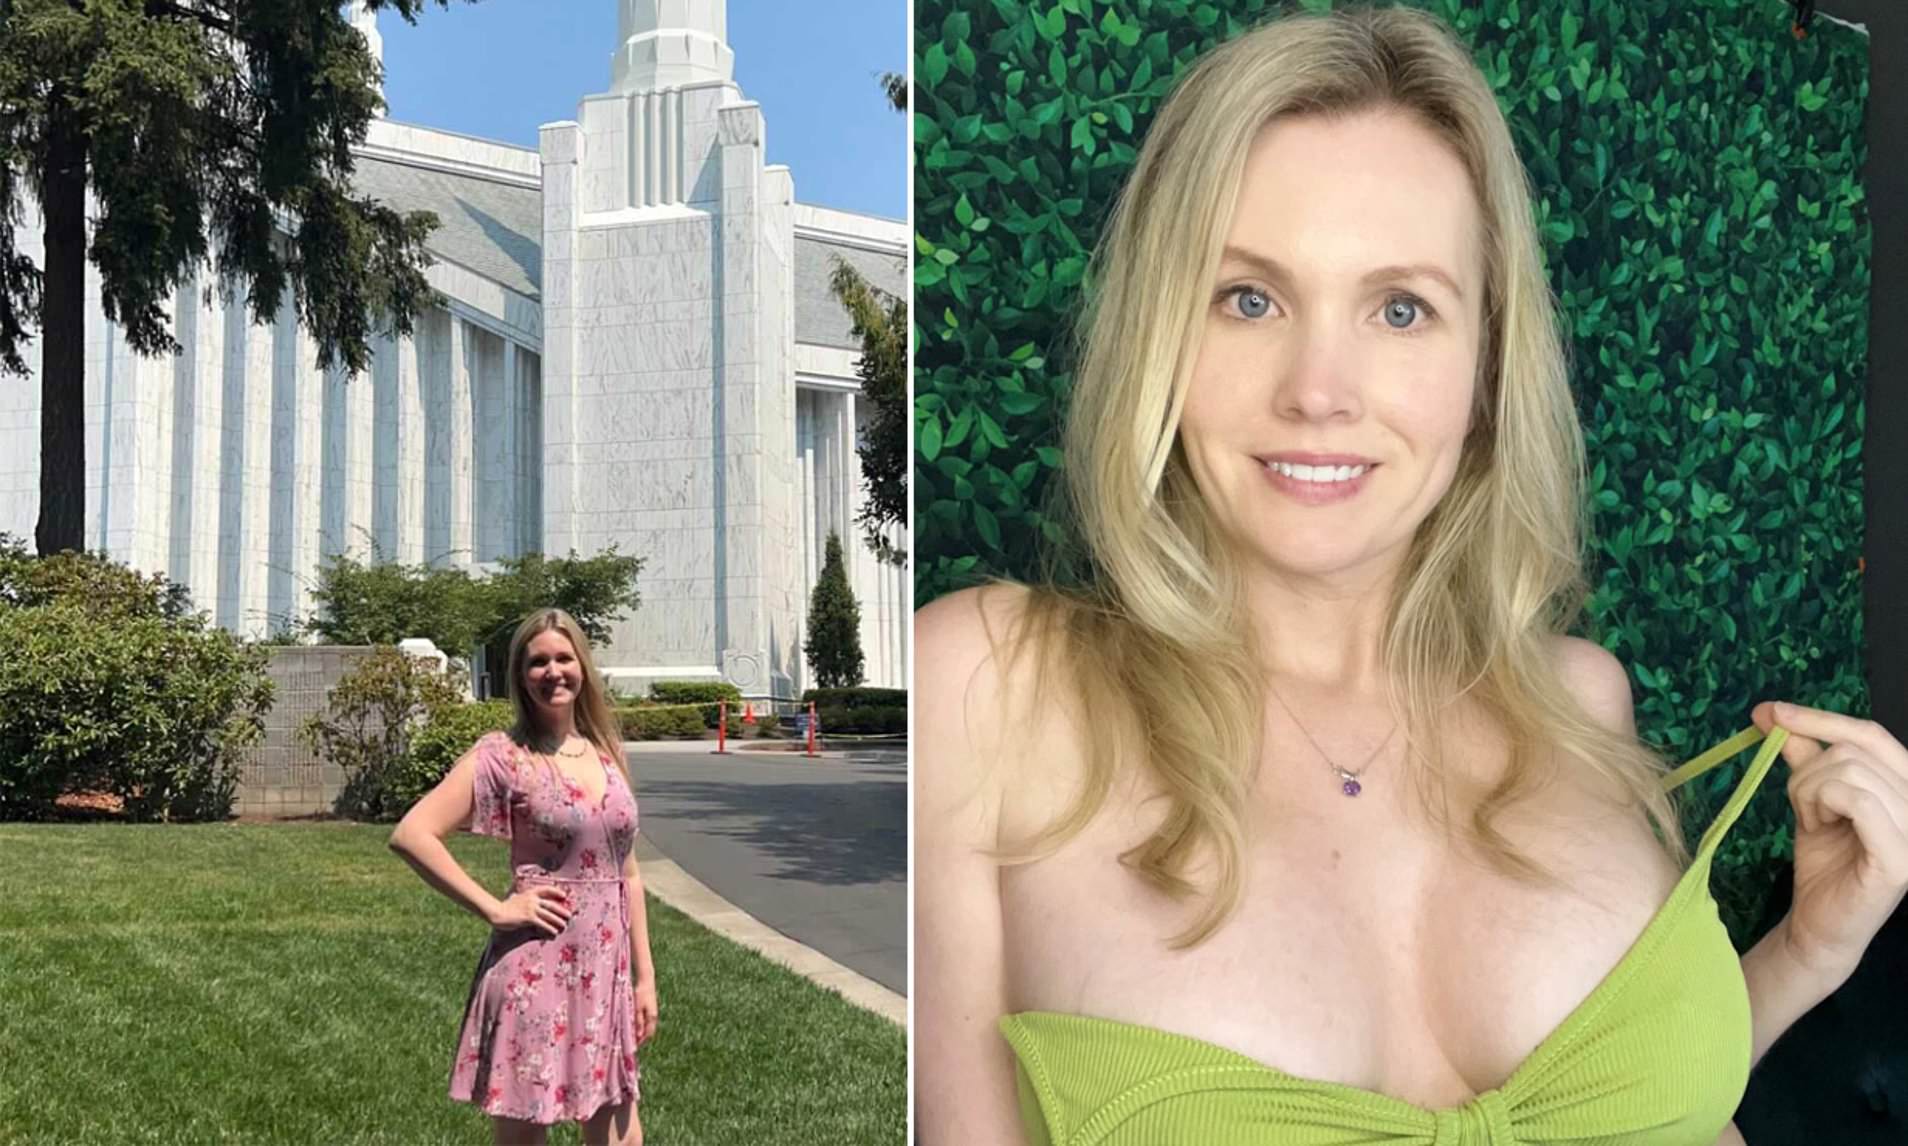 colin gooch recommends hot mormon wife pic